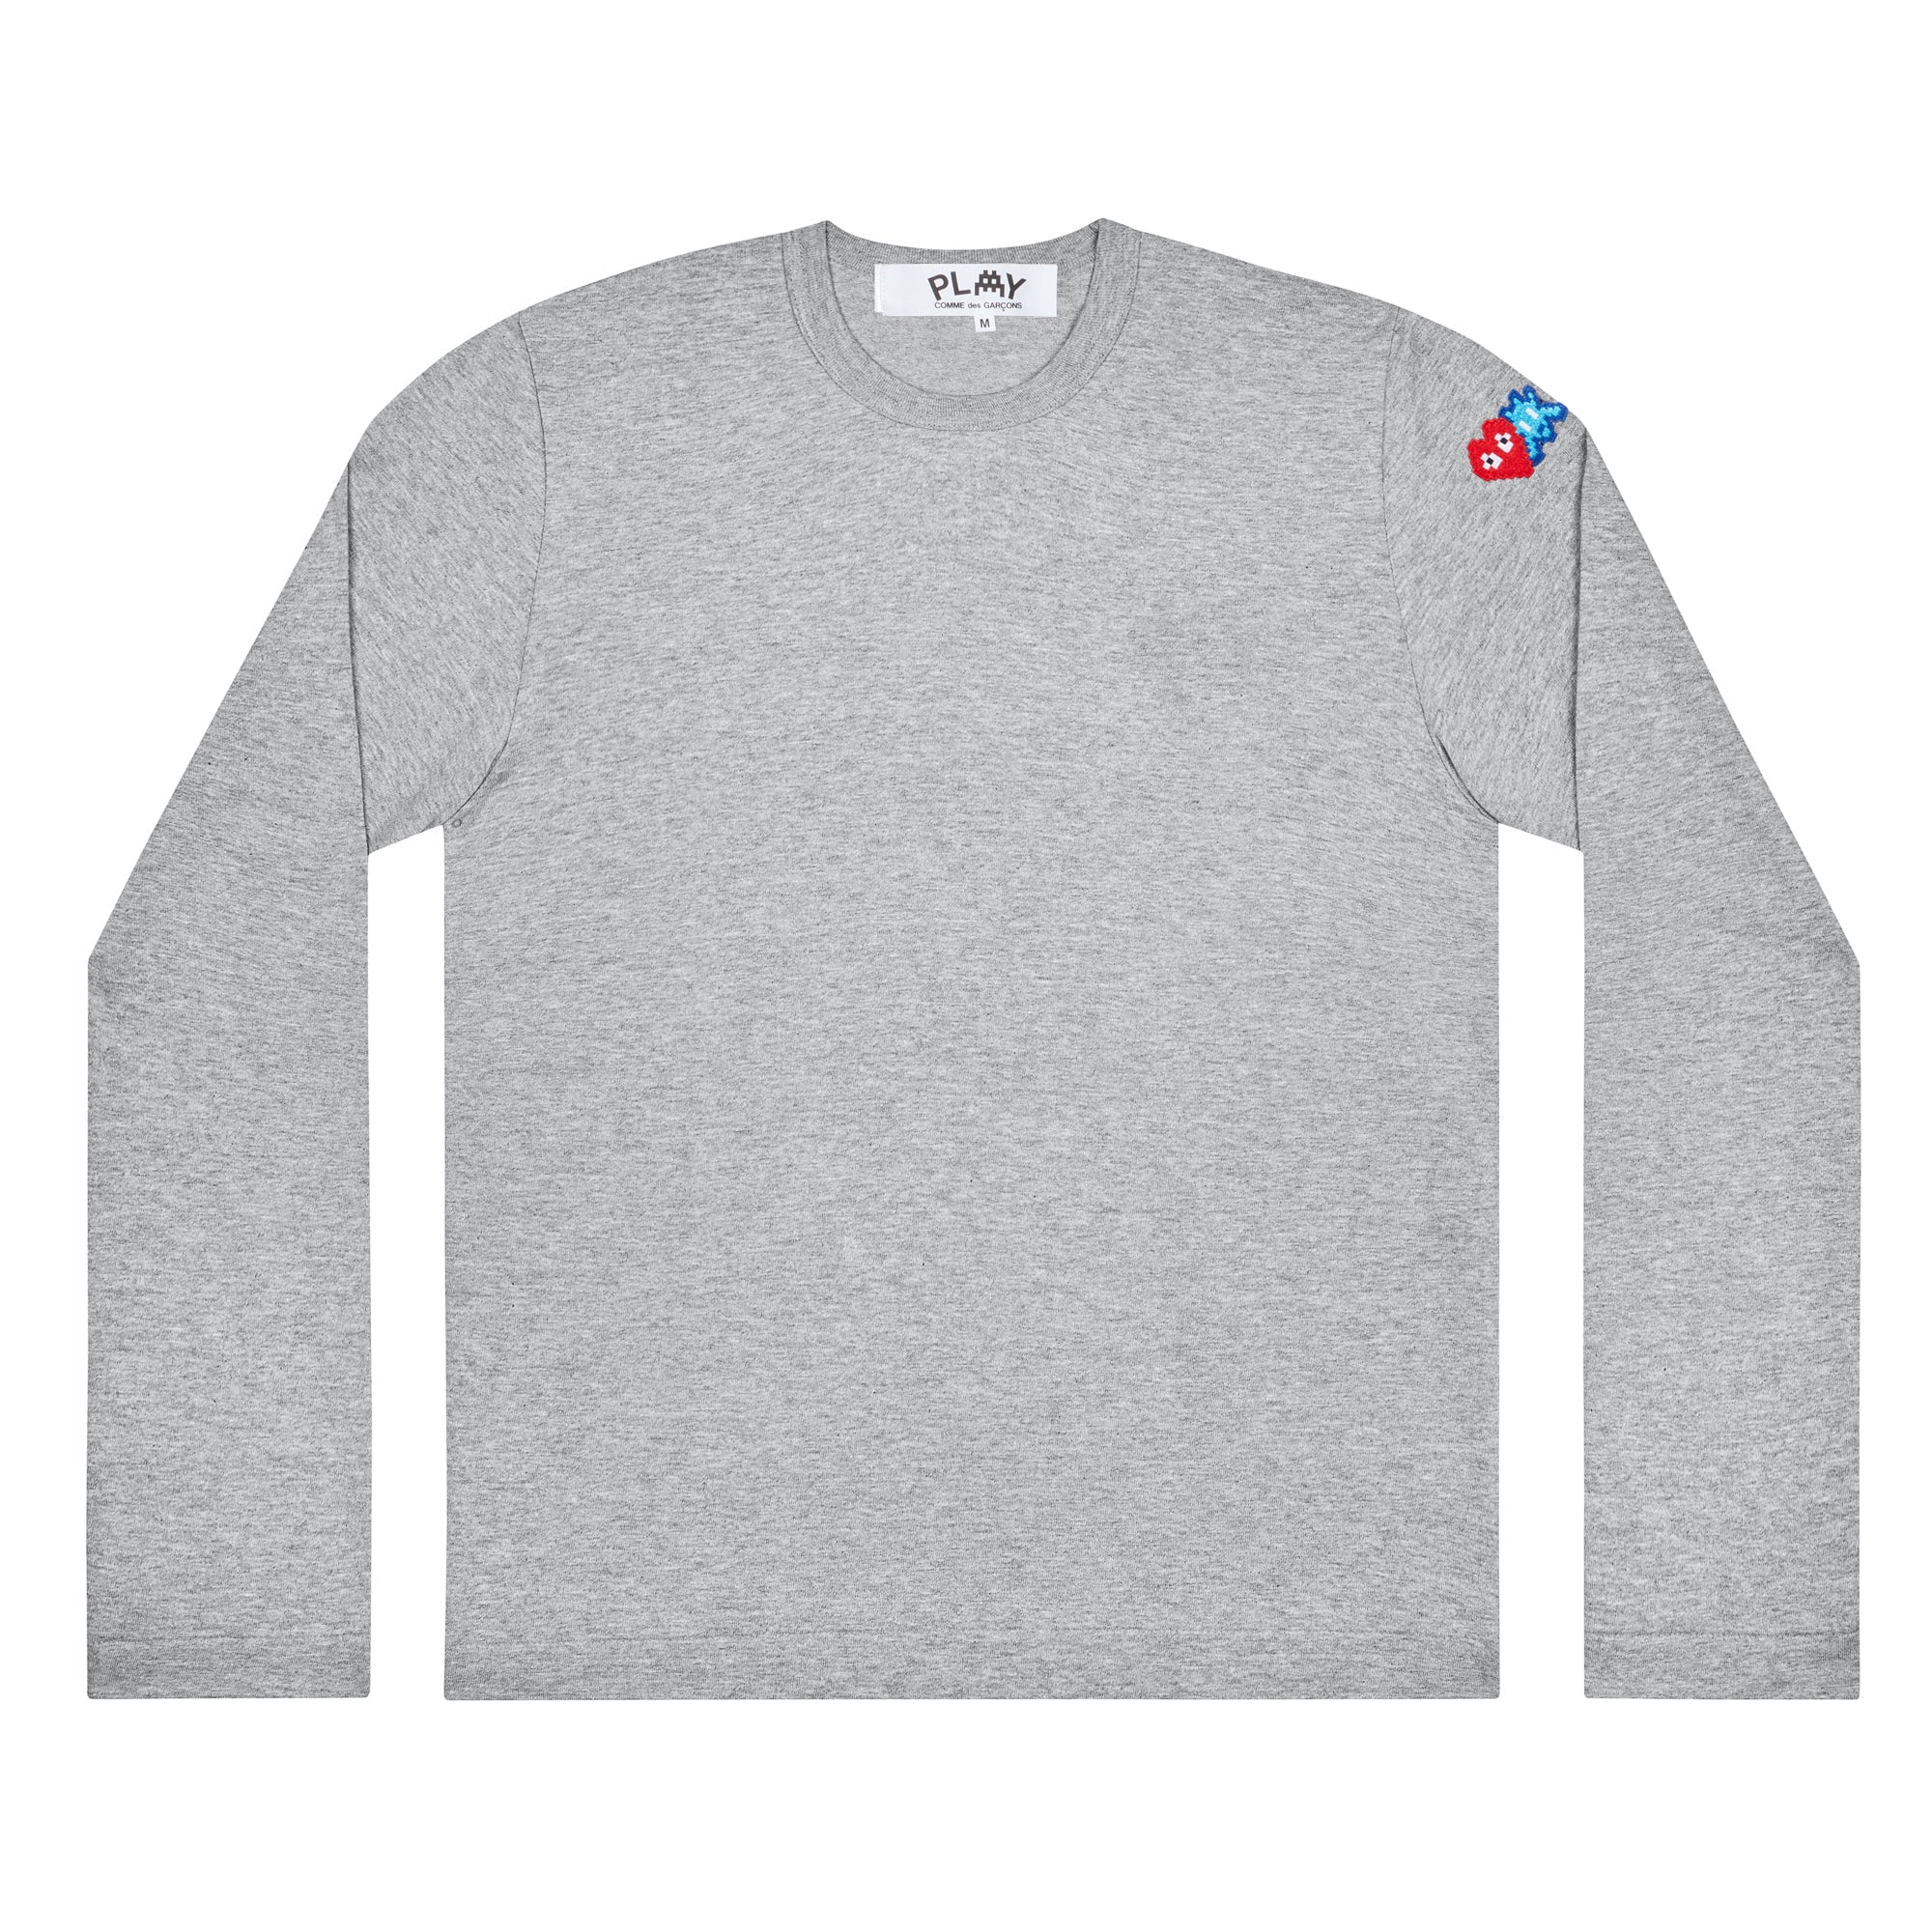 PLAY L/S Invader T-Shirt Red and Blue Sleeve Emblem (Grey)